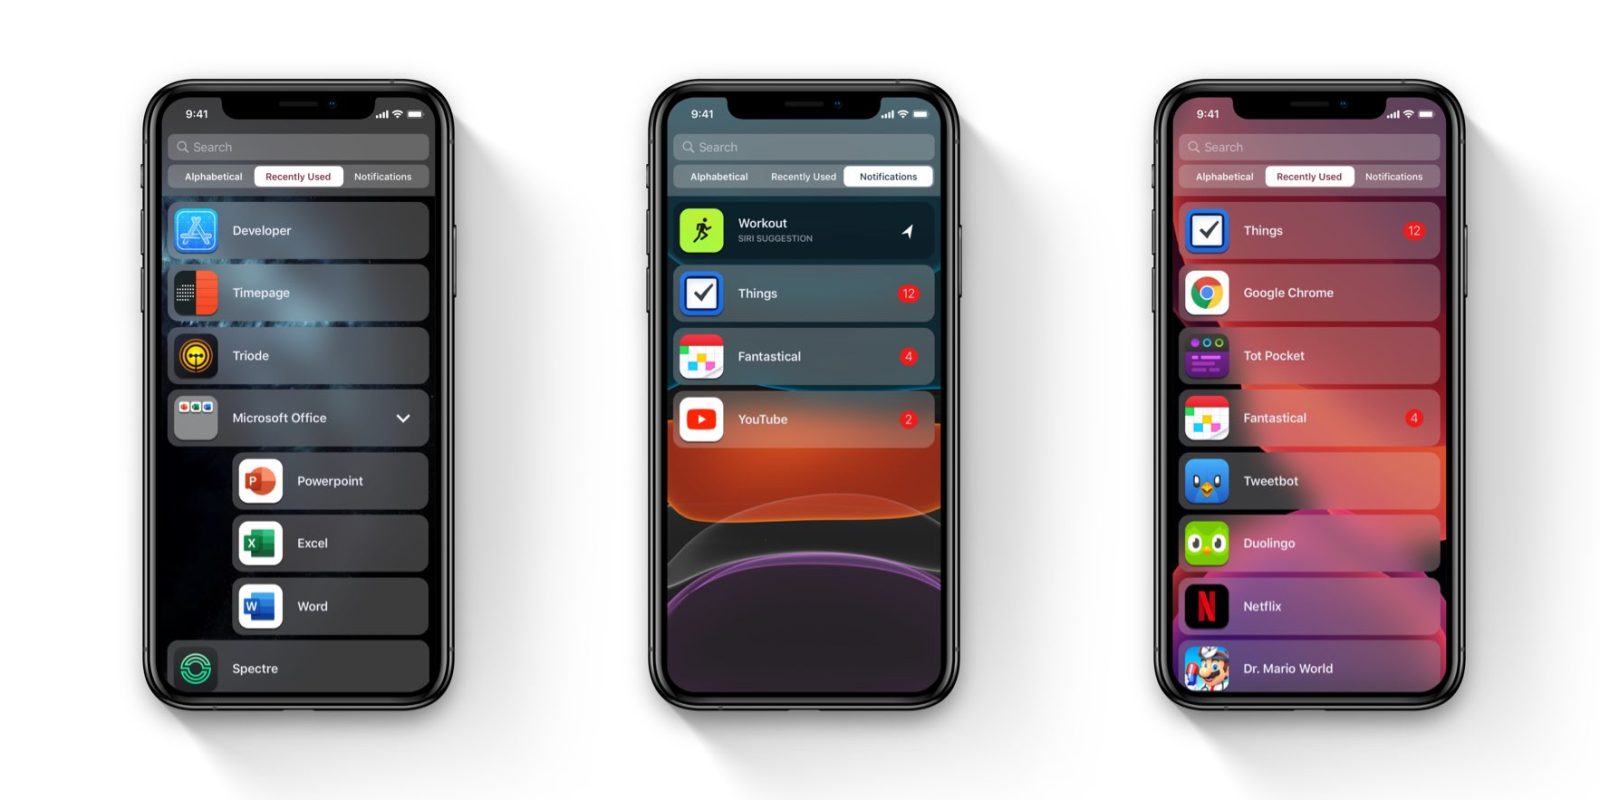 Mockups imagine what the leaked iOS 14 home screen changes ...